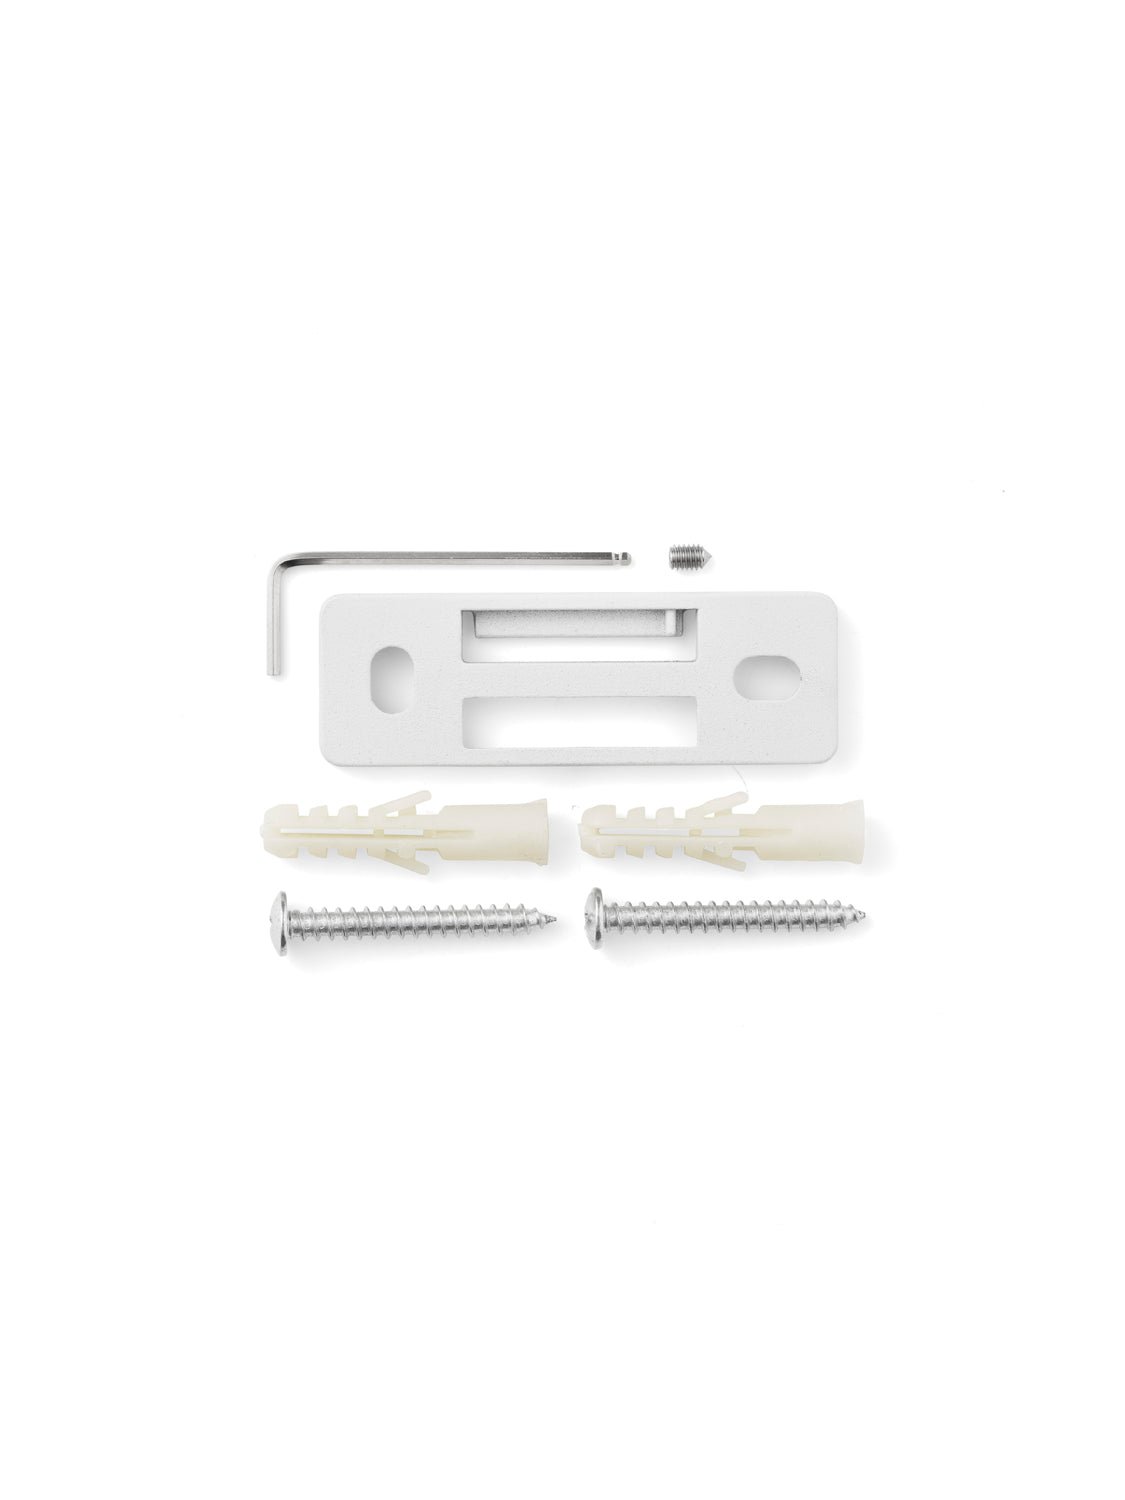 Afteroom Coat Hanger, Screws & Rawplugs, 2 pcs. for Small